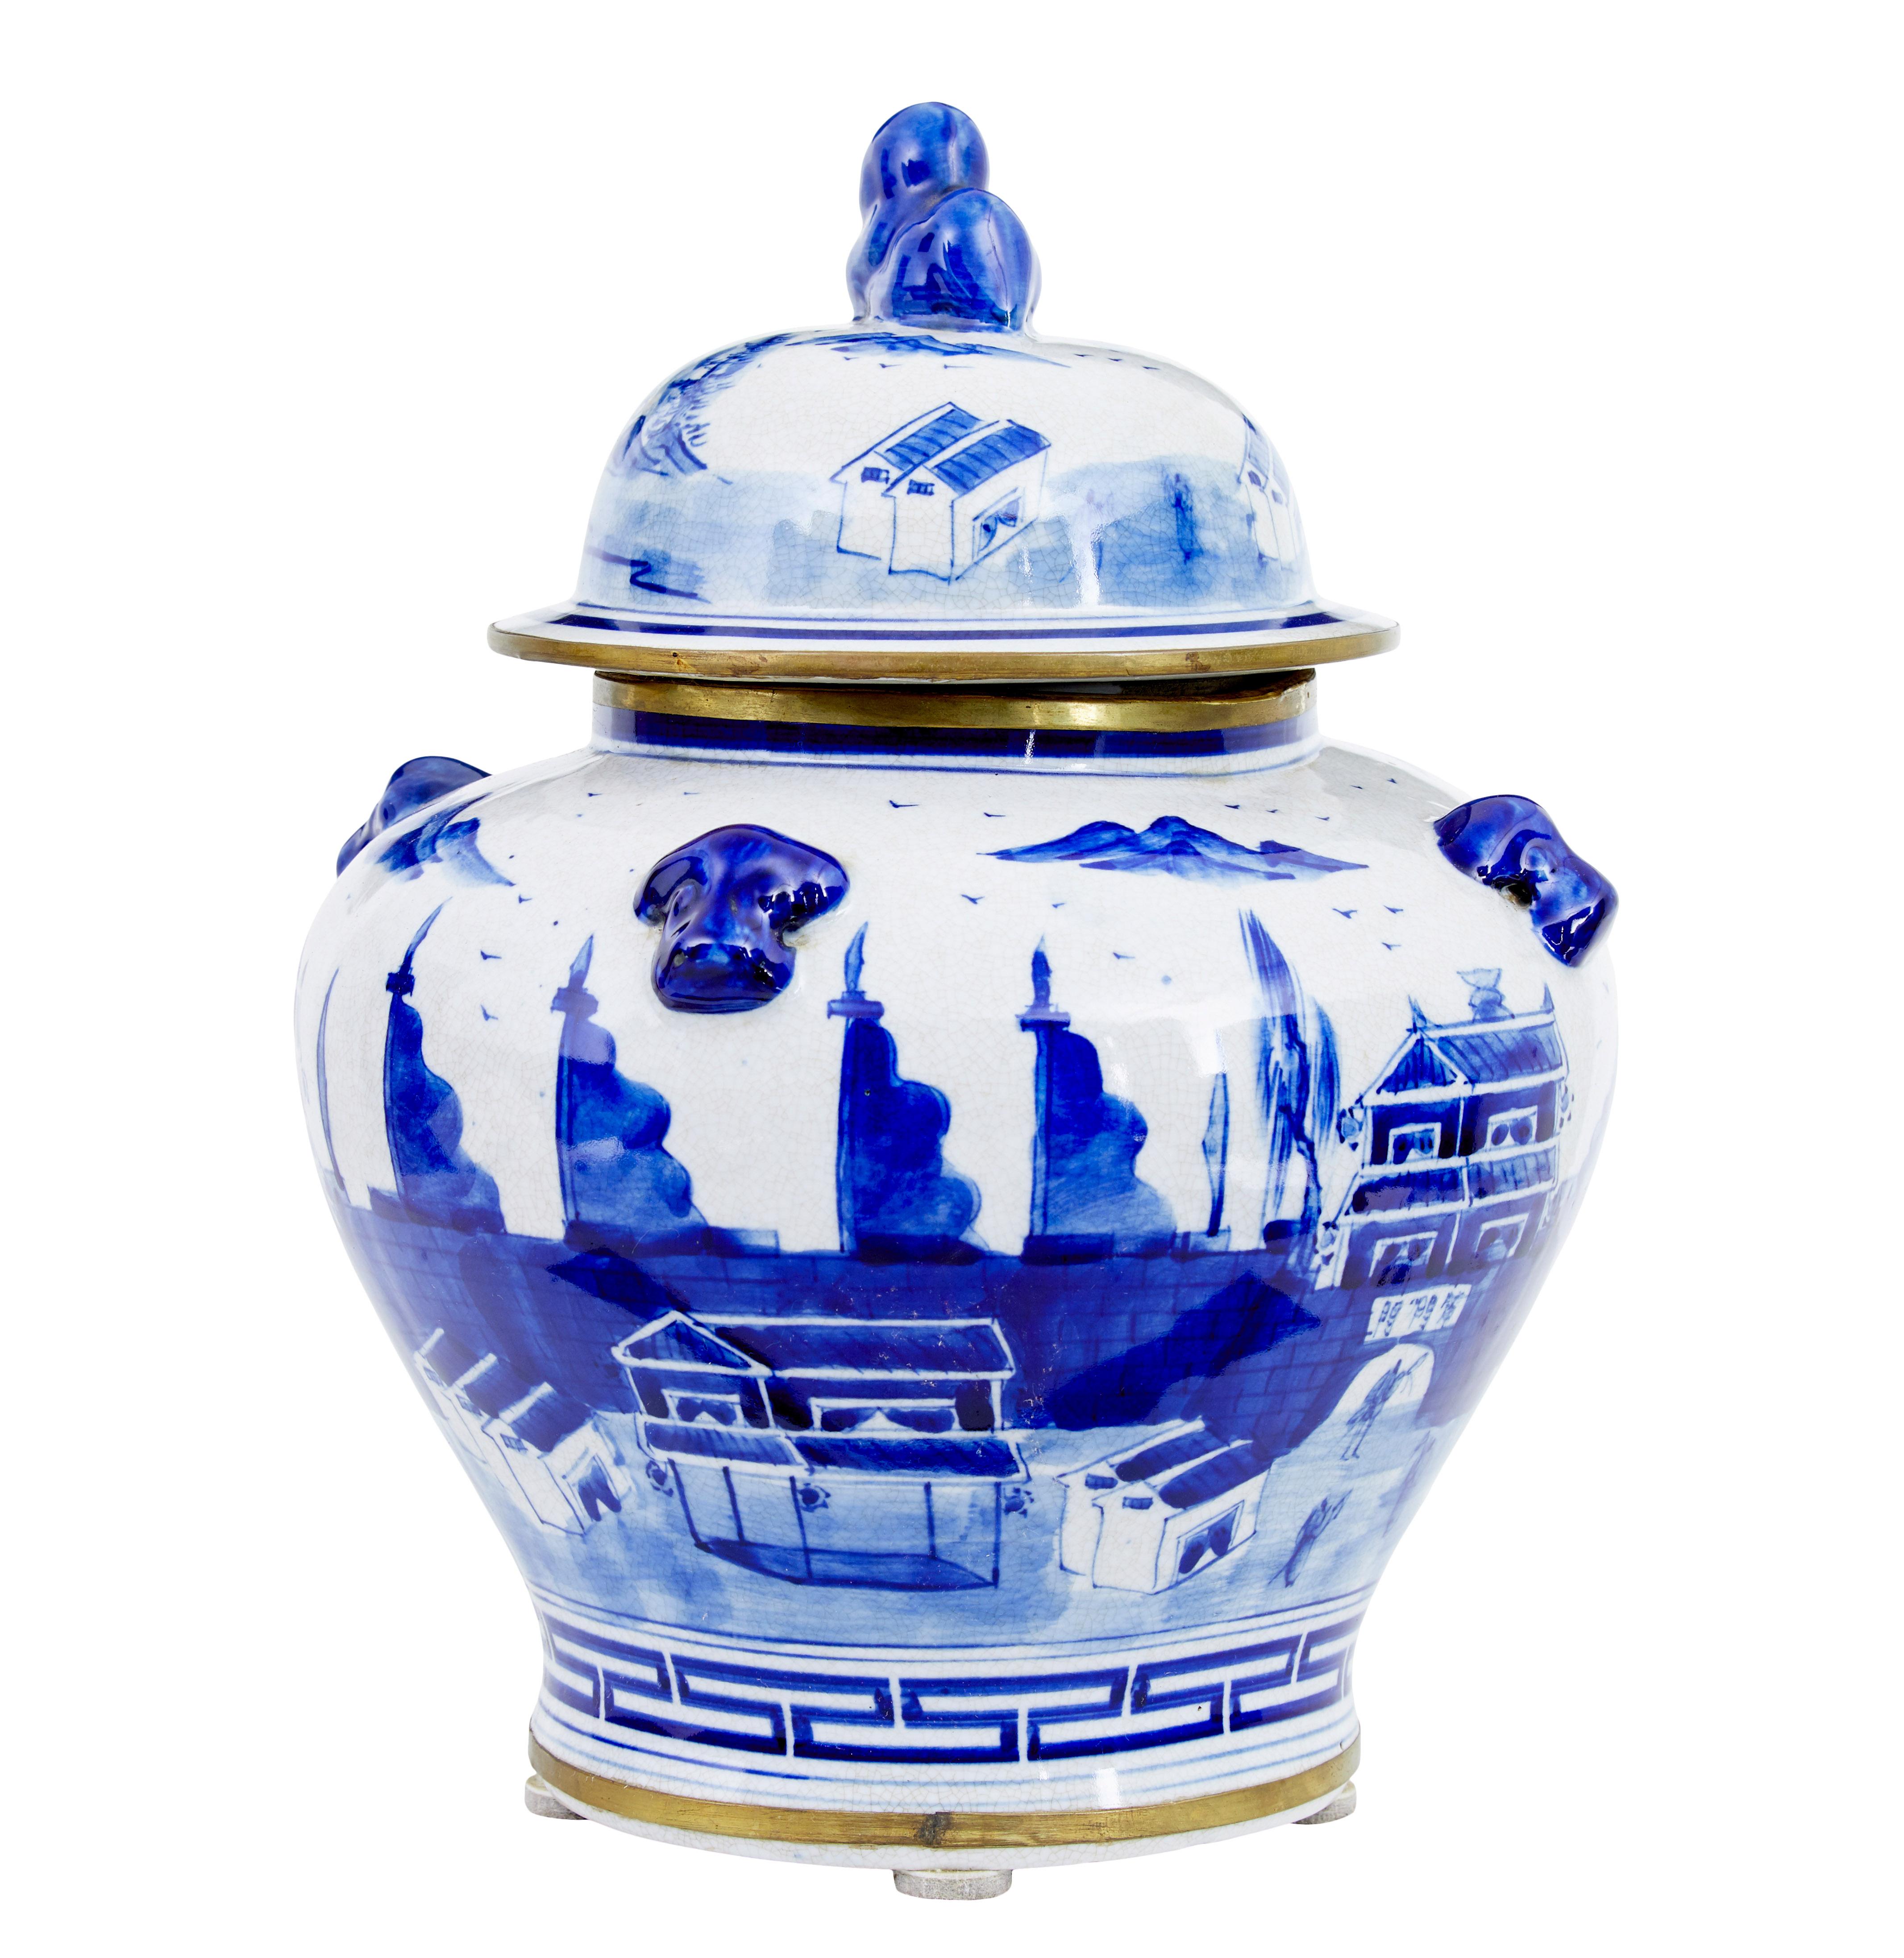 Decorative ceramic ginger jar circa 1960.

Good quality small Chinese ginger jar.  Hand painted in blue on a white background, further decorated with gilt rim and bottom edge.

Good condition.  Rim to top of jar is wonky but lid sits fine on it.